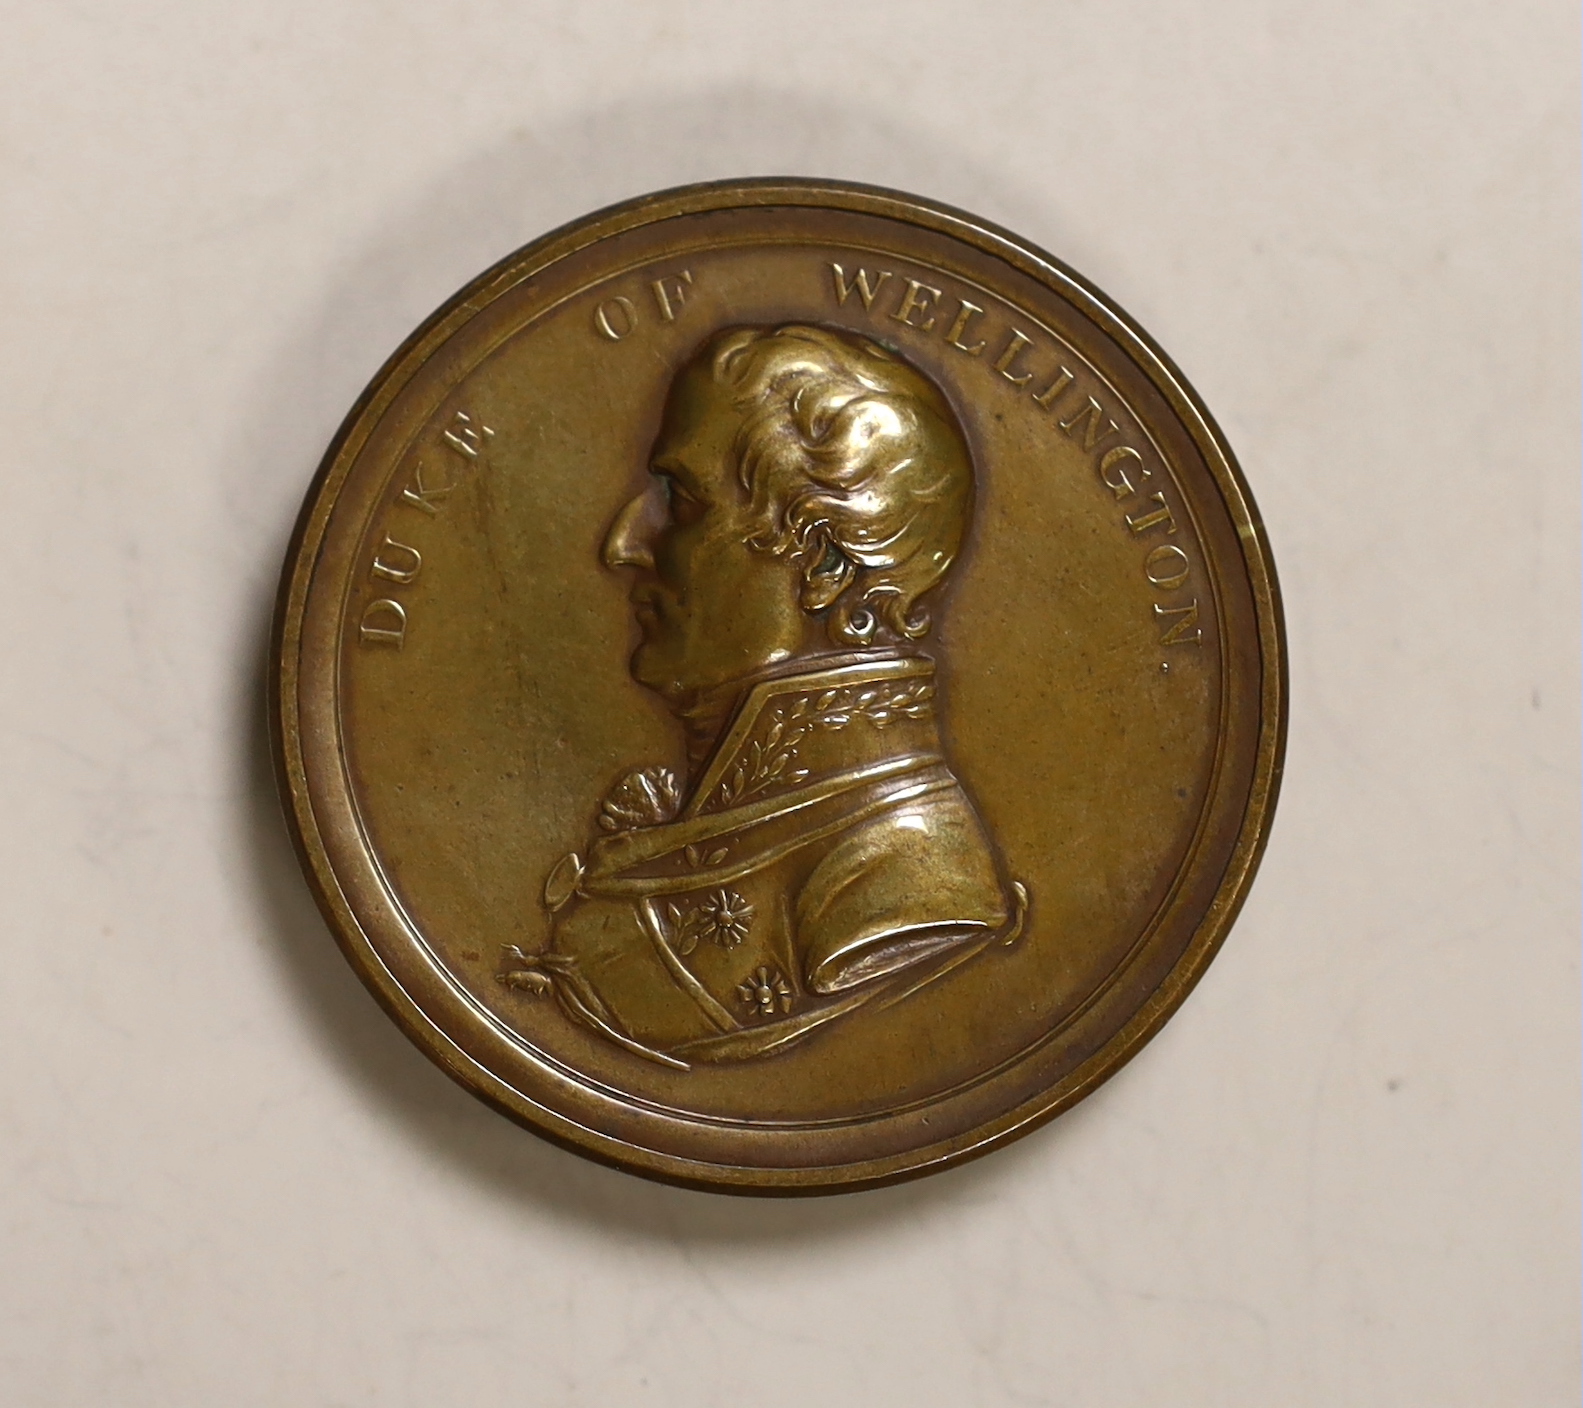 A cylindrical box formed in the shape of a coin commemorating The Duke of Wellington's Continental Victories, 4.7cm